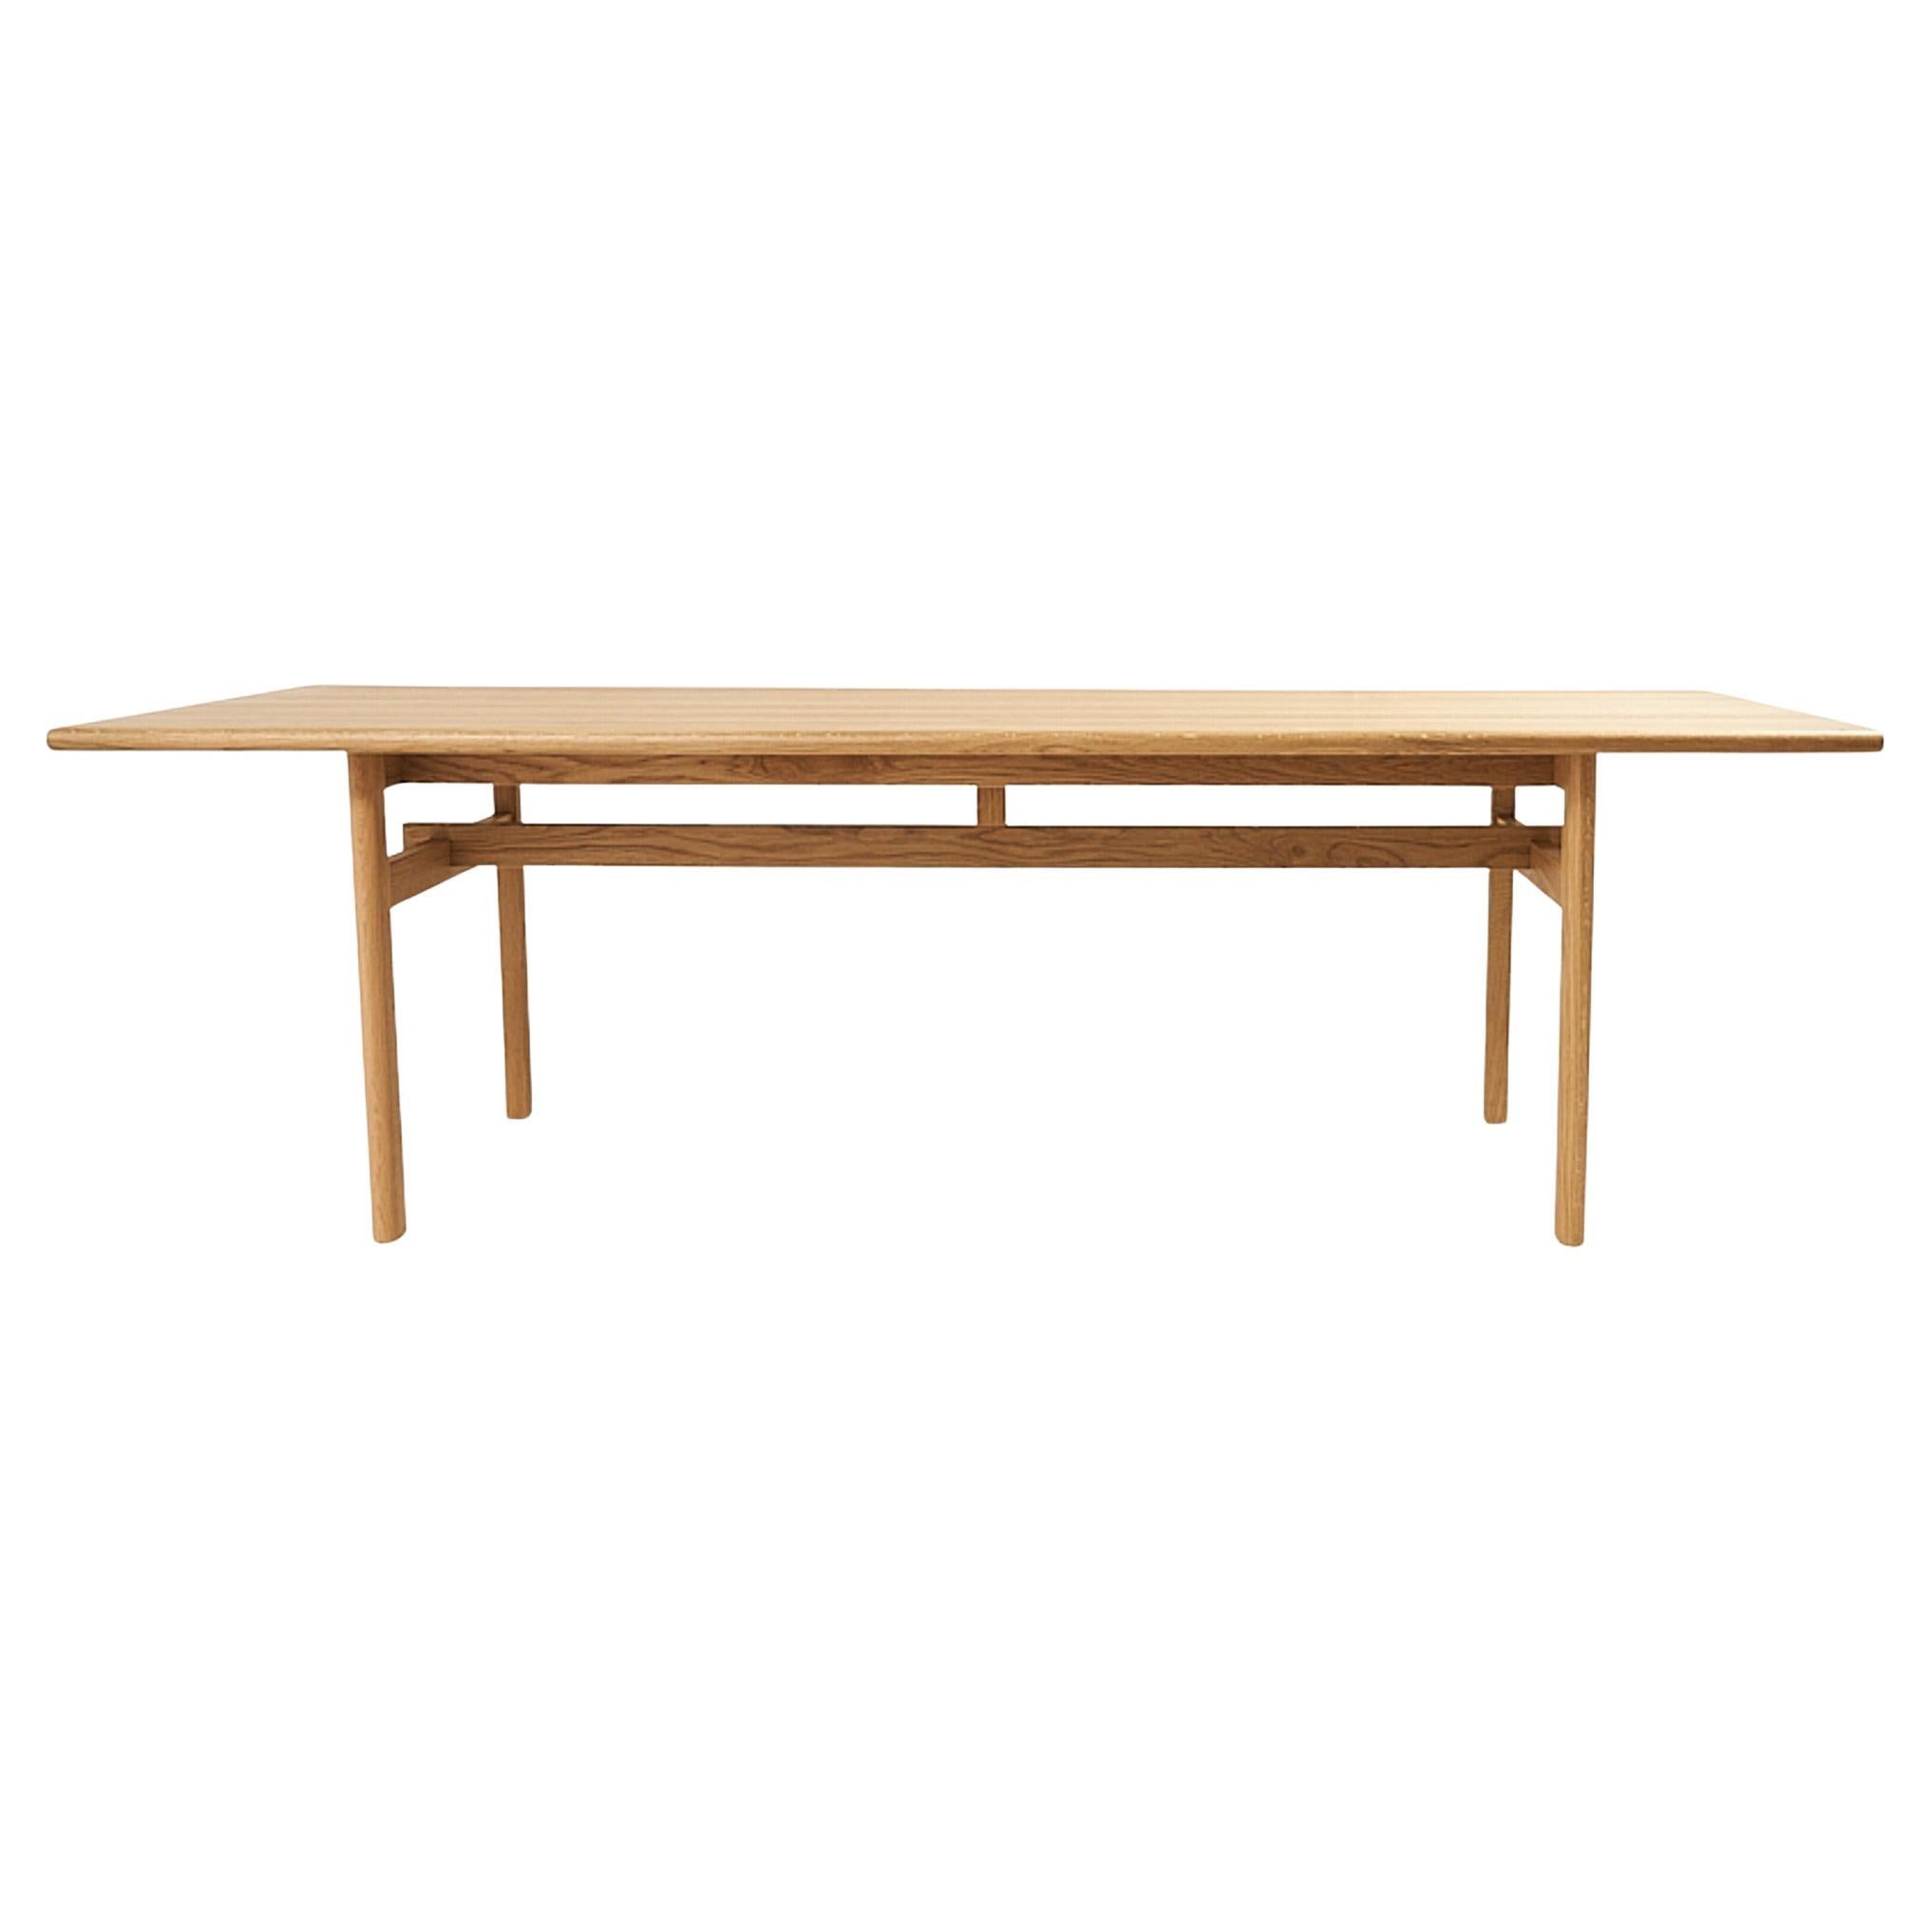 Schumacher Editions Mokki 75" Dining Table in Natural Matte